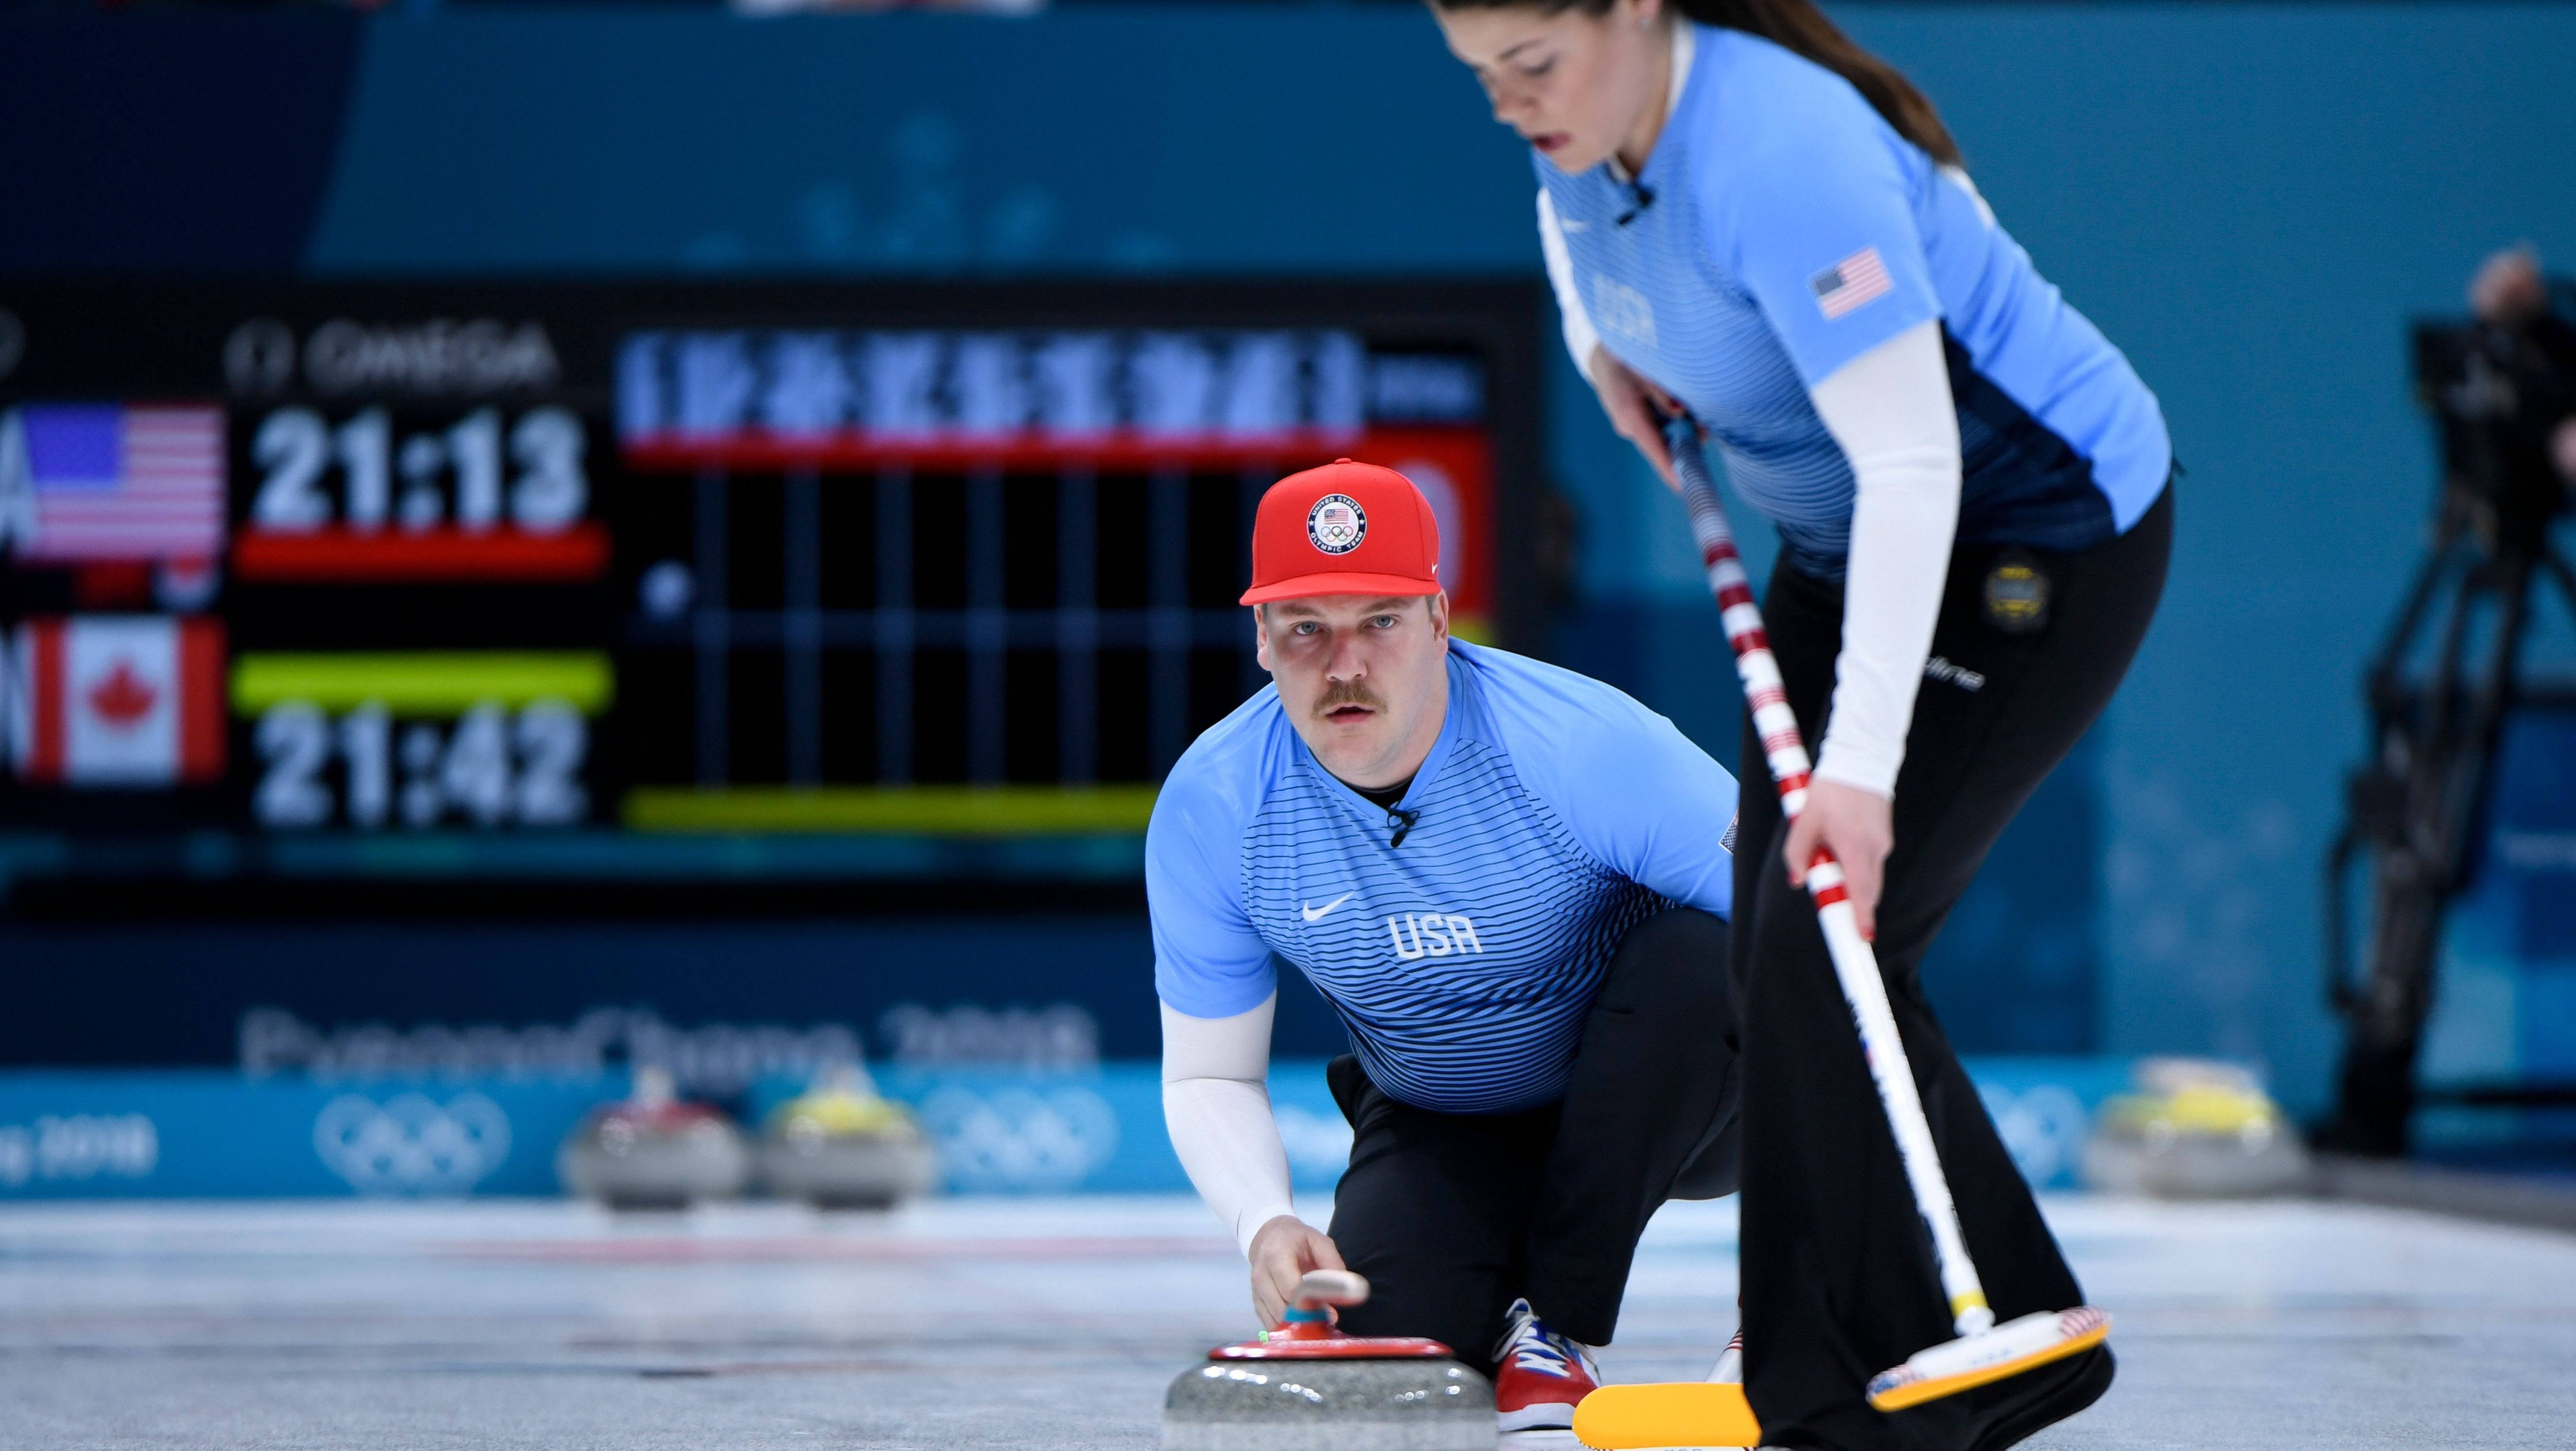 Olympics Live Stream How to Watch Curling Without Cable Heavy